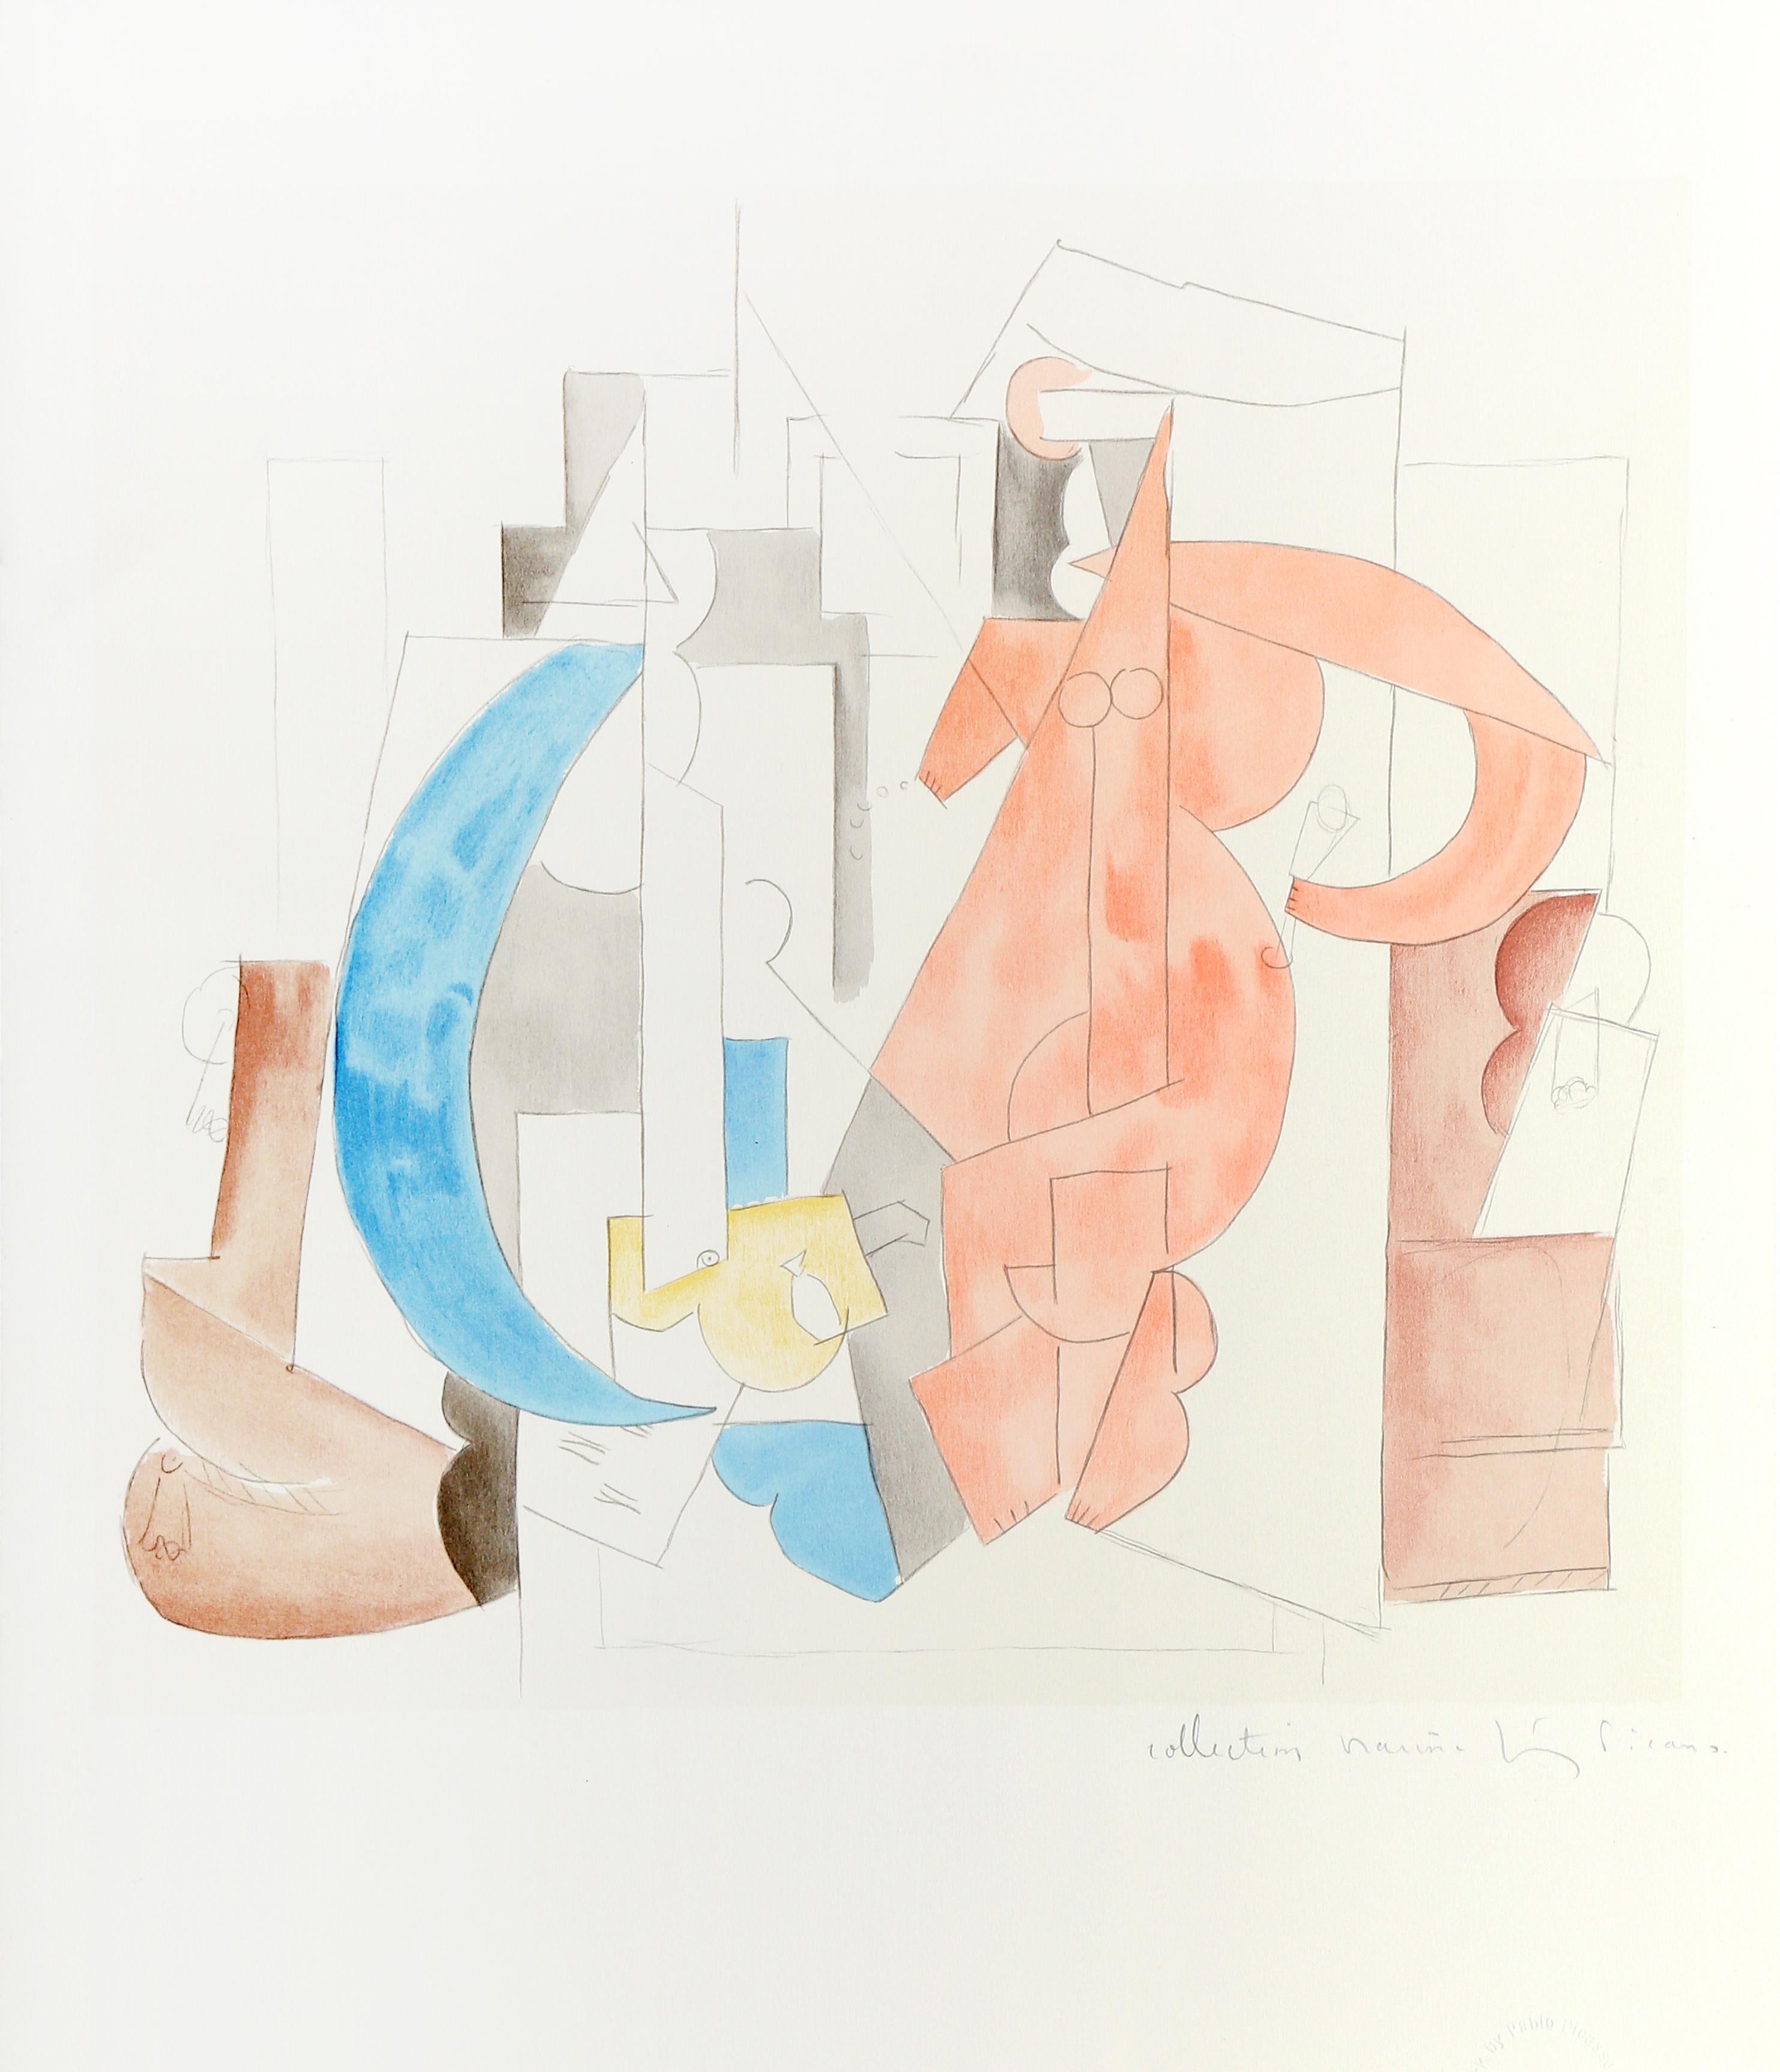 Comprised of several shapes, the composition by Pablo Picasso exemplifies his manipulation of form to produce new perspectives and views of his subjects that would otherwise be unseen. A lithograph from the Marina Picasso Estate Collection after the